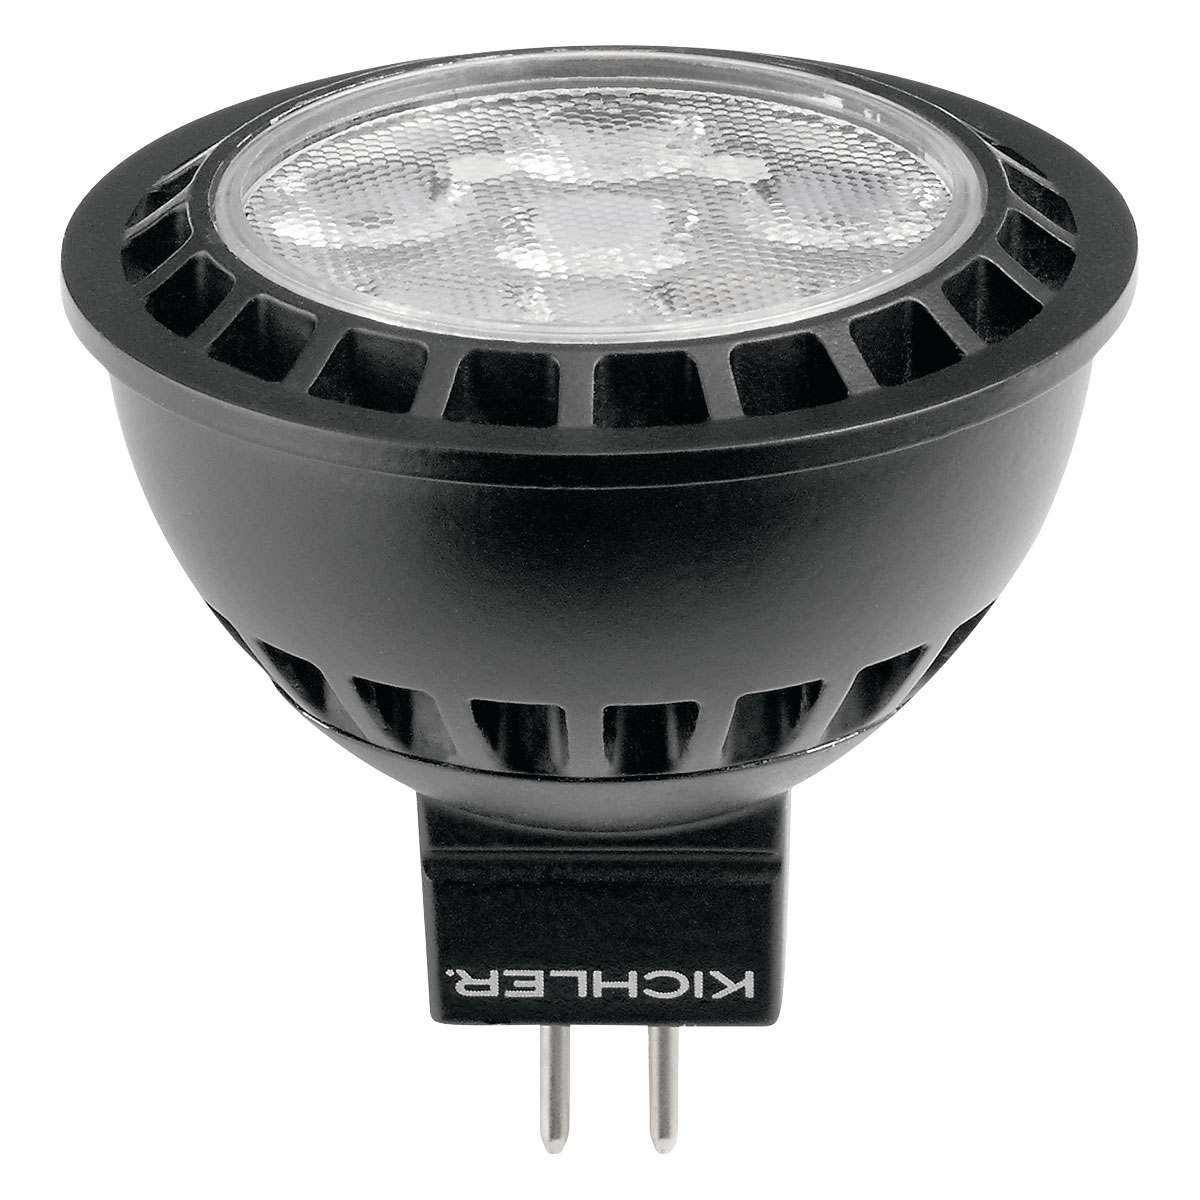 This high power, damp location MR16 Bi-Pin 12V LED lamp compares to the 50W Halogen. Featuring a 3000K pure white temperature, this lamp puts forth a 25-degree narrow flood beam spread angle.